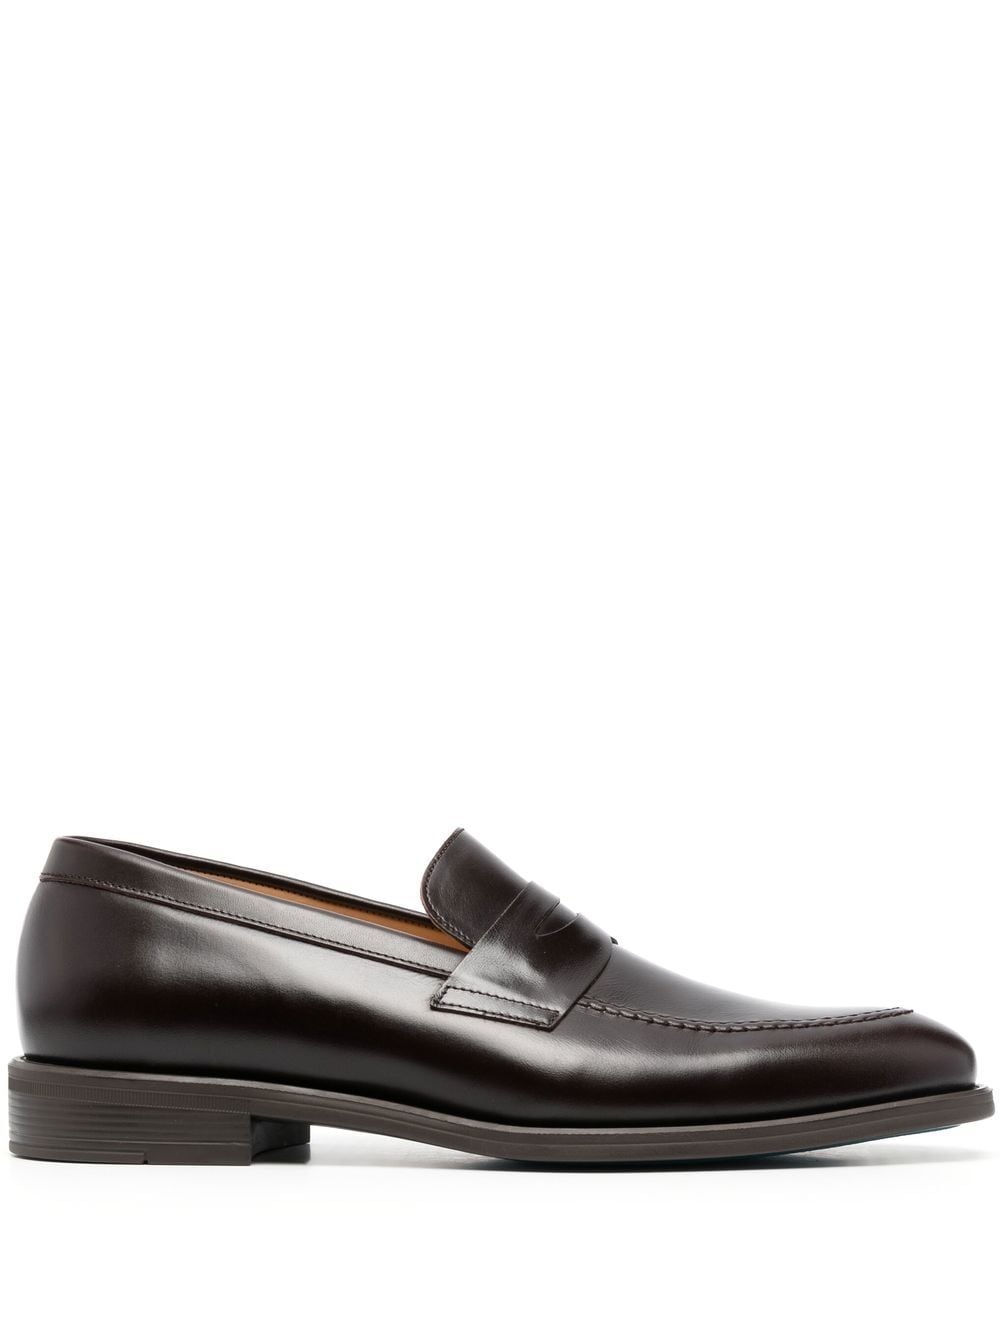 PS Paul Smith pointed-toe leather loafers - Brown von PS Paul Smith